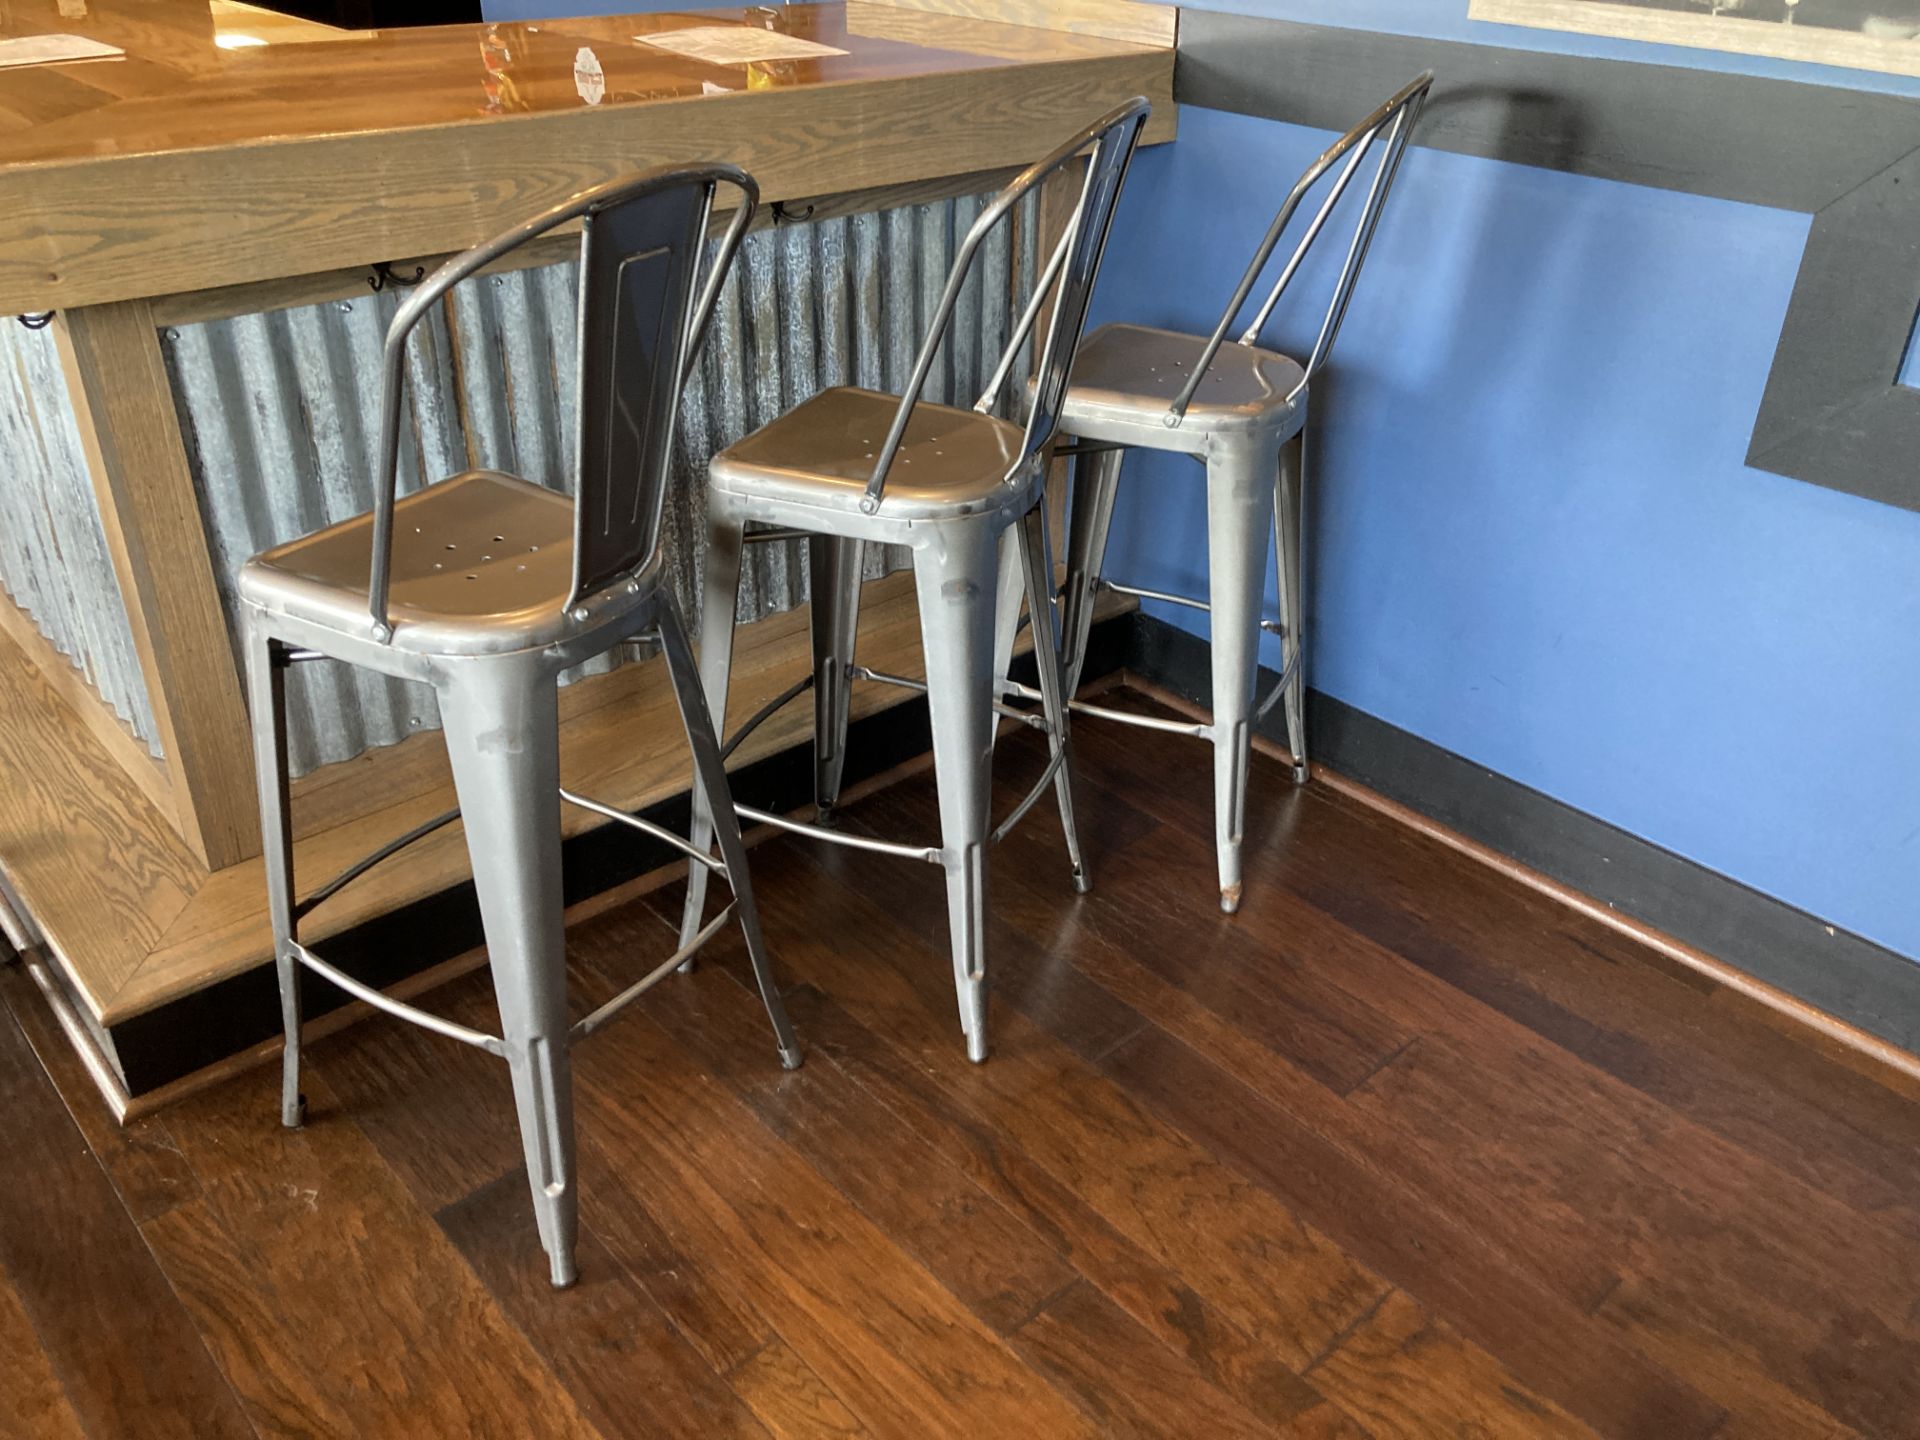 Lot of 14 metal bar stools in front of the Bar (Bar structure is not included in sale) - Image 2 of 2